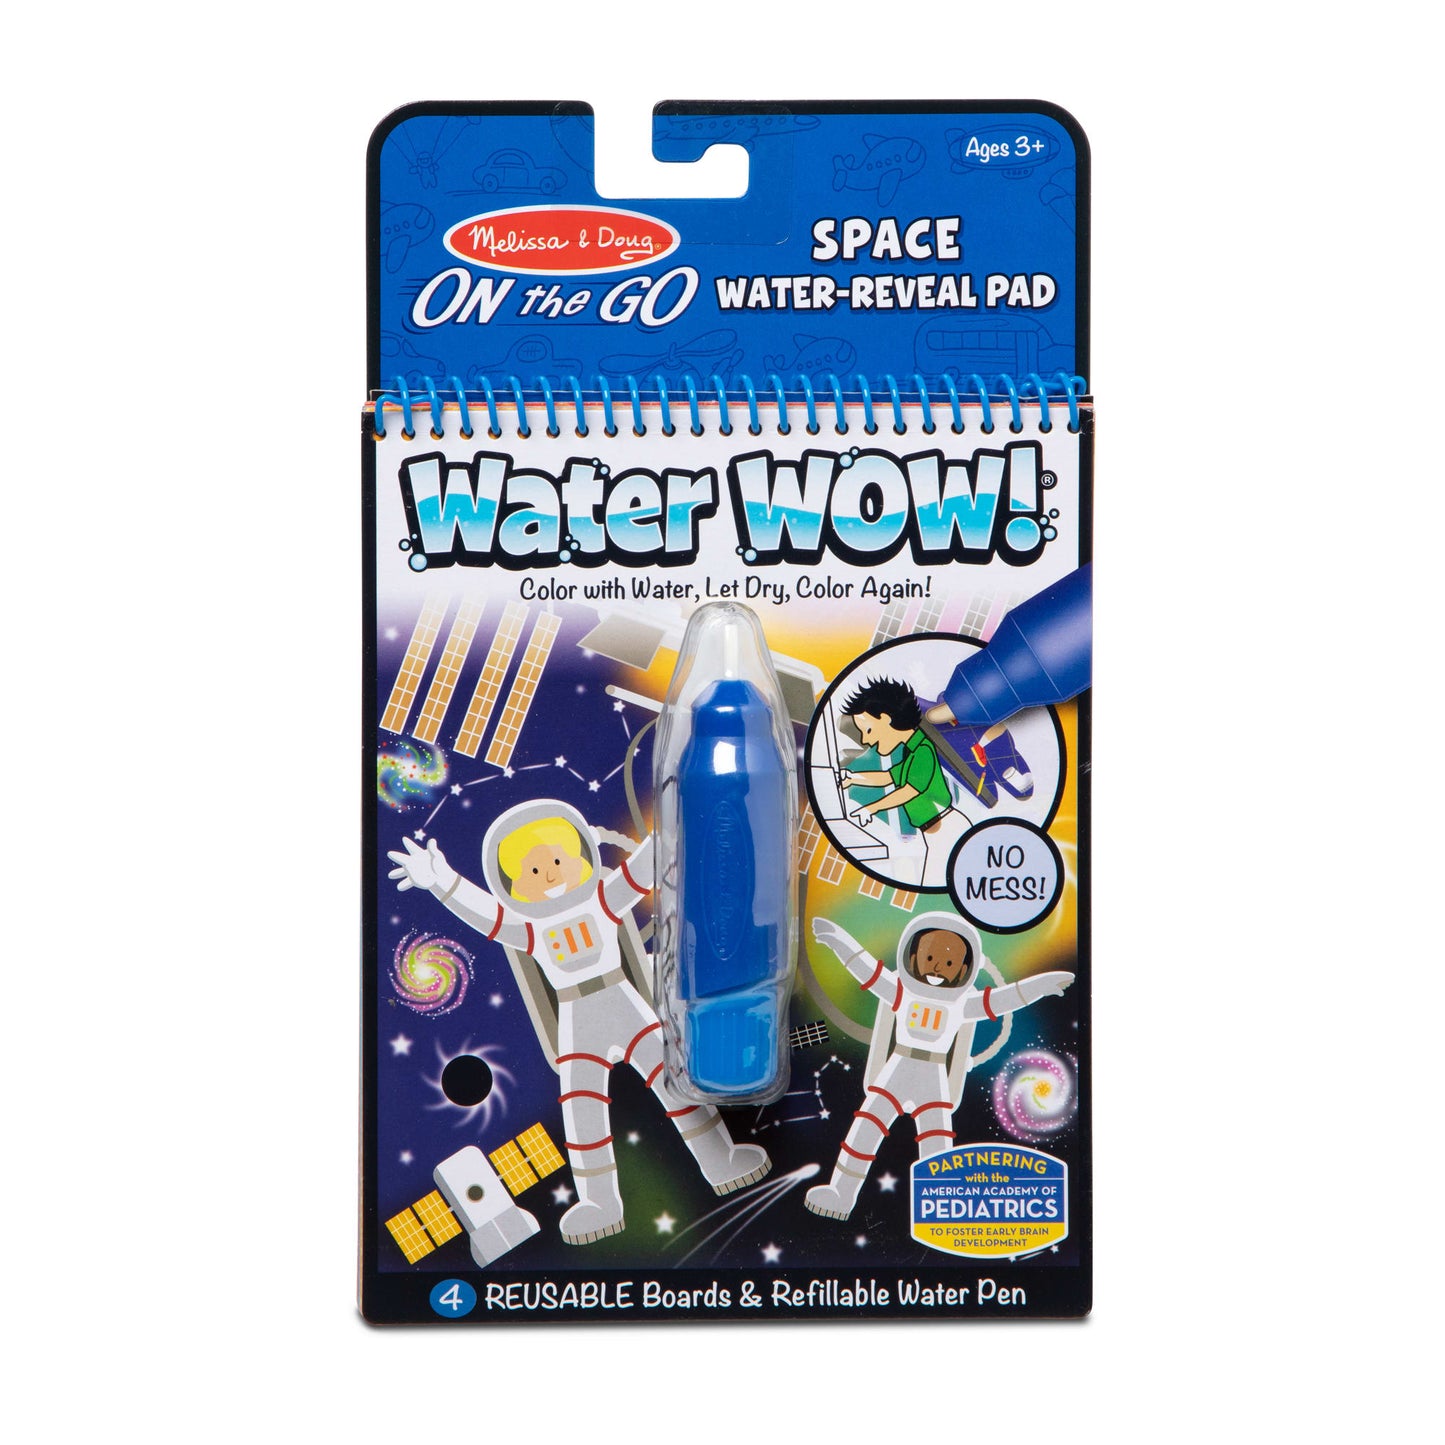 Melissa & Doug Water Wow! Space Water-Reveal Pad - On the Go Travel Activity